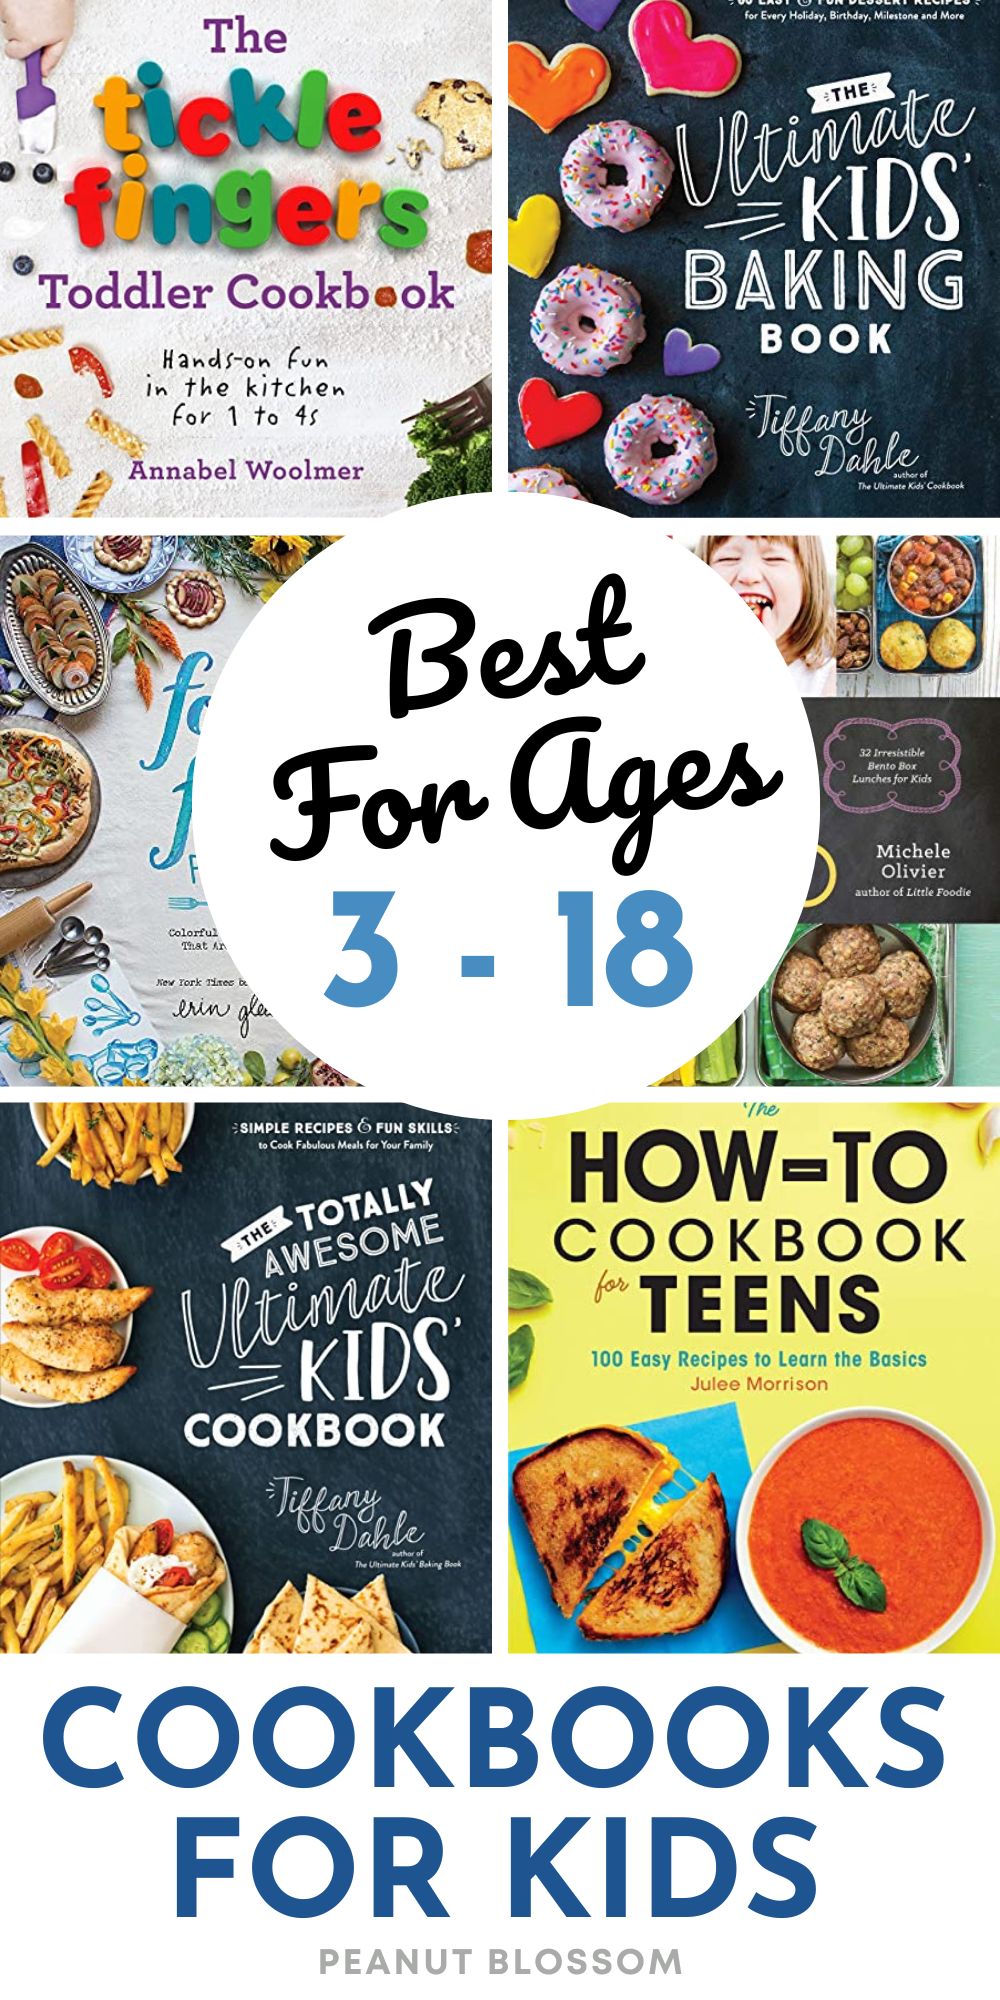 A photo collage shows 6 of the best cookbooks for kids.